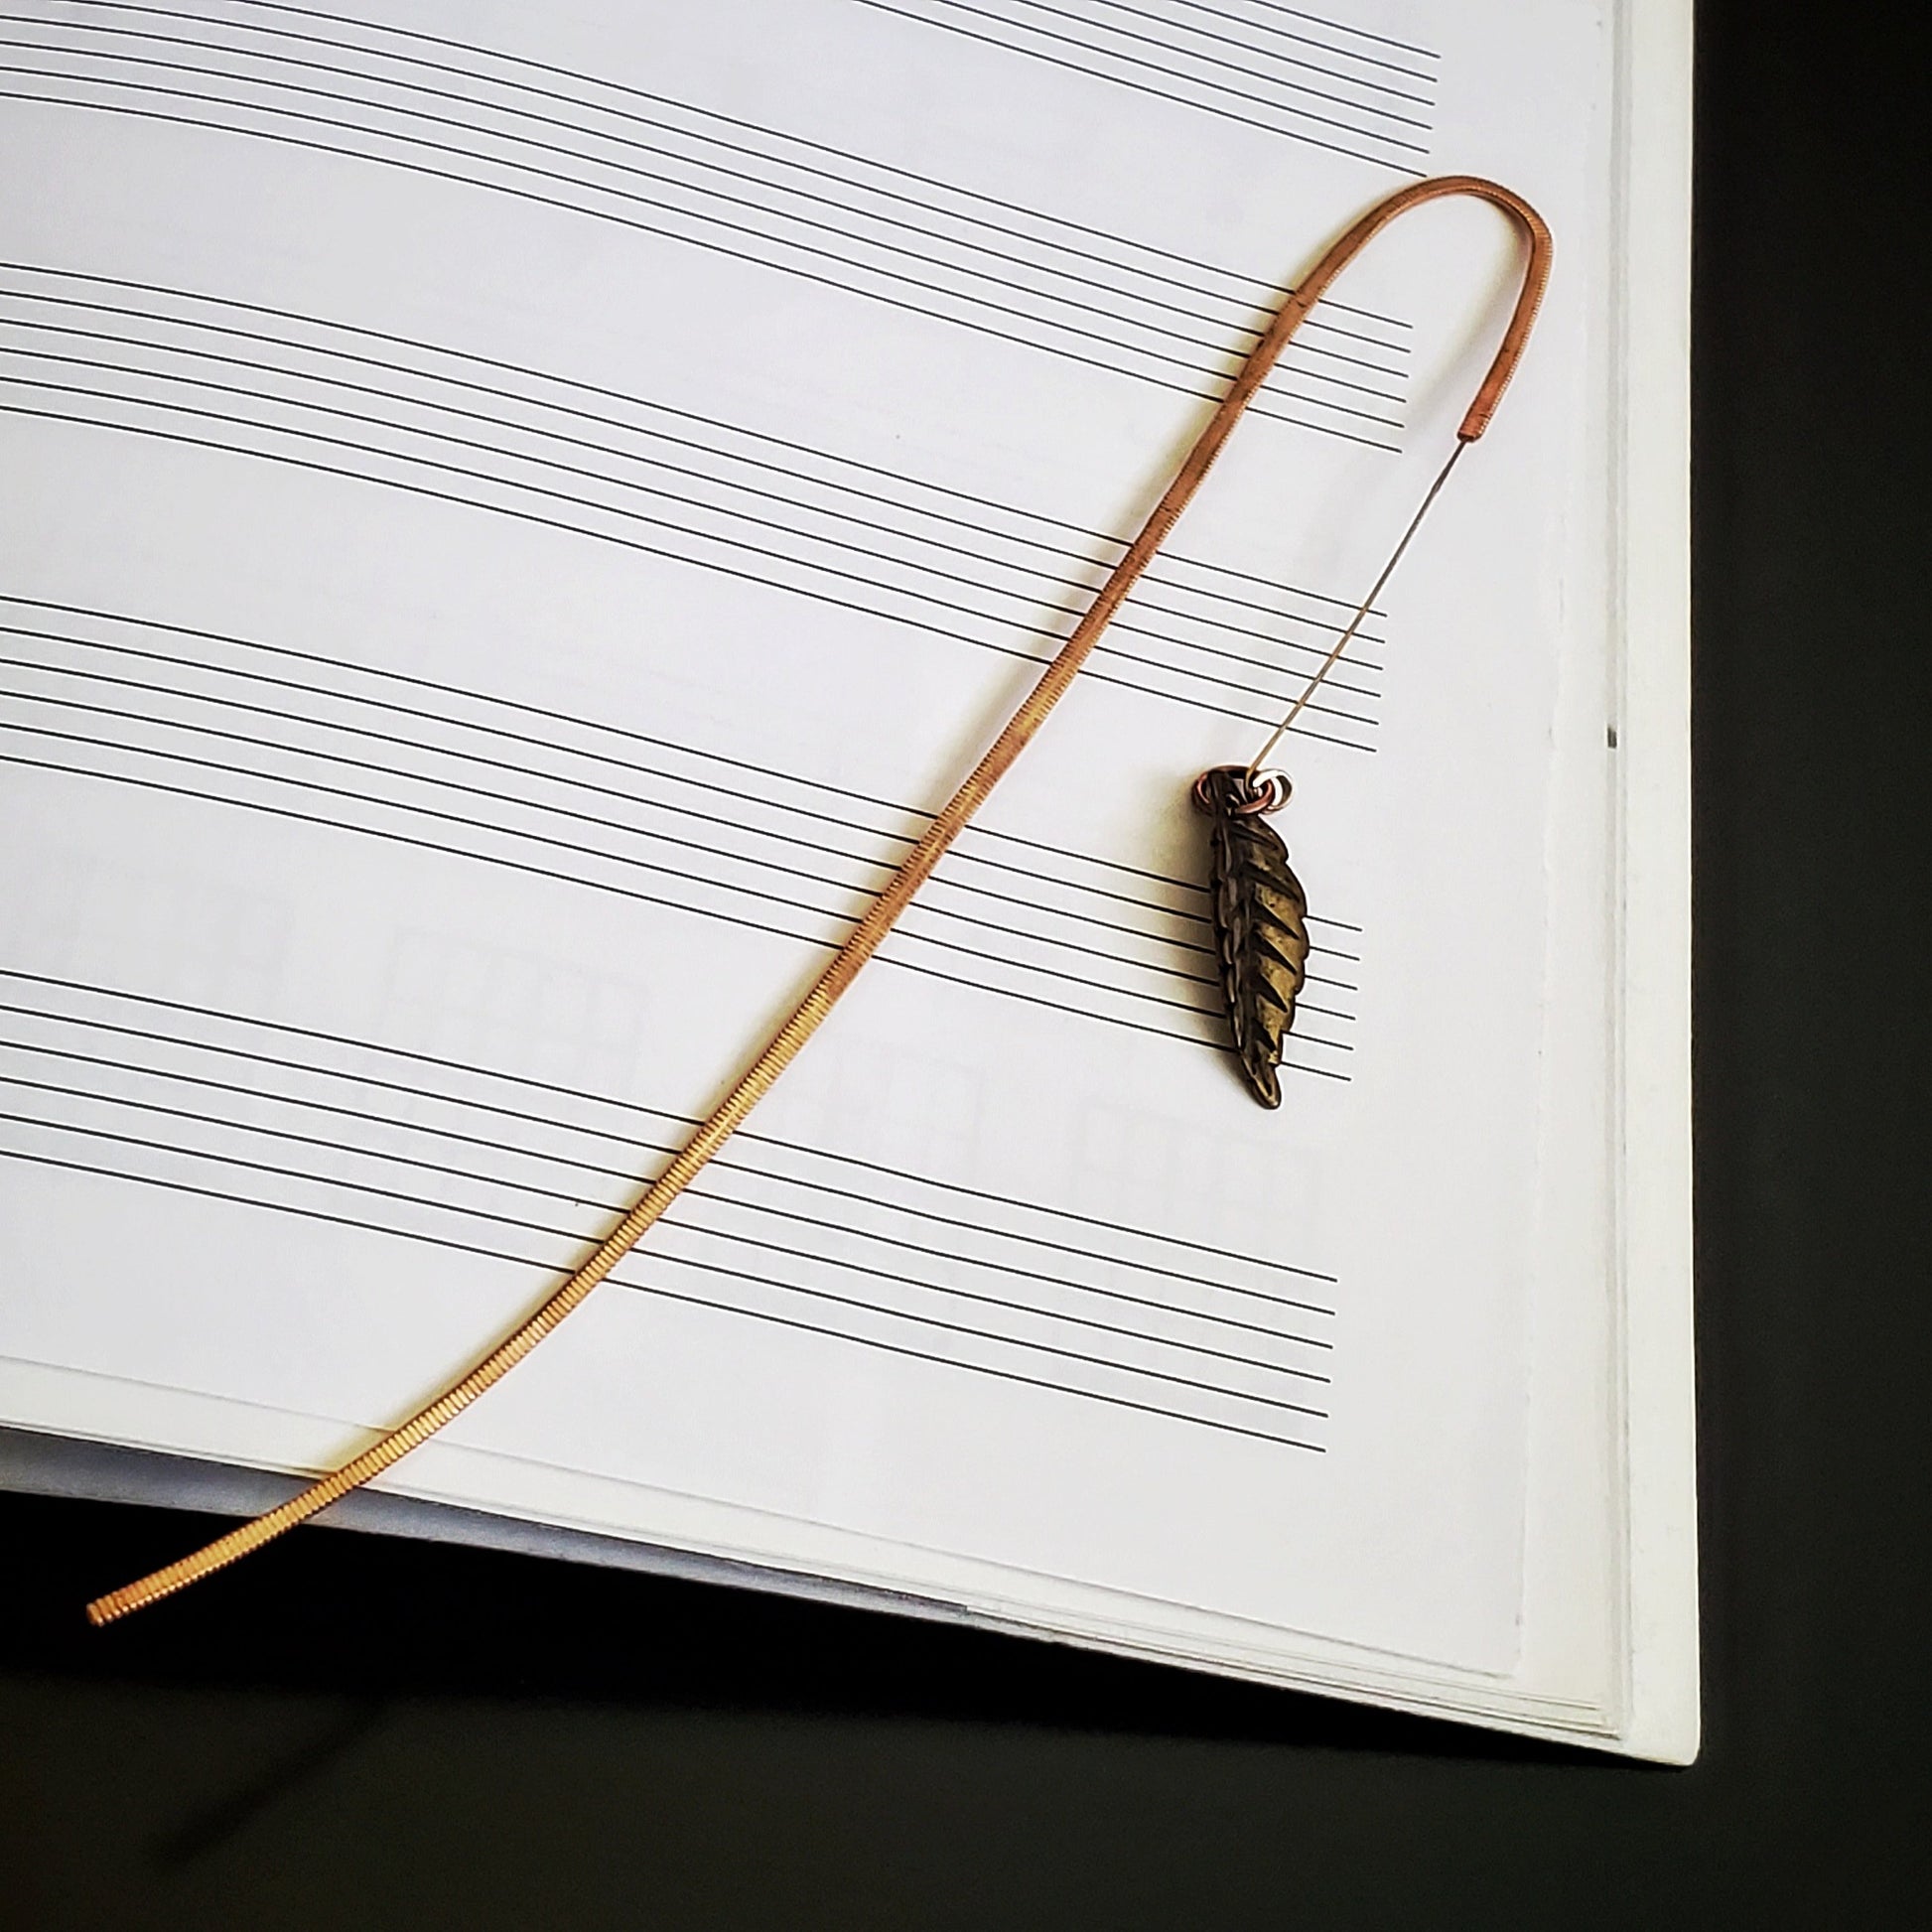 hook style bookmark made from an upcycled guitar string and a leaf shaped charm - background is blank sheet music